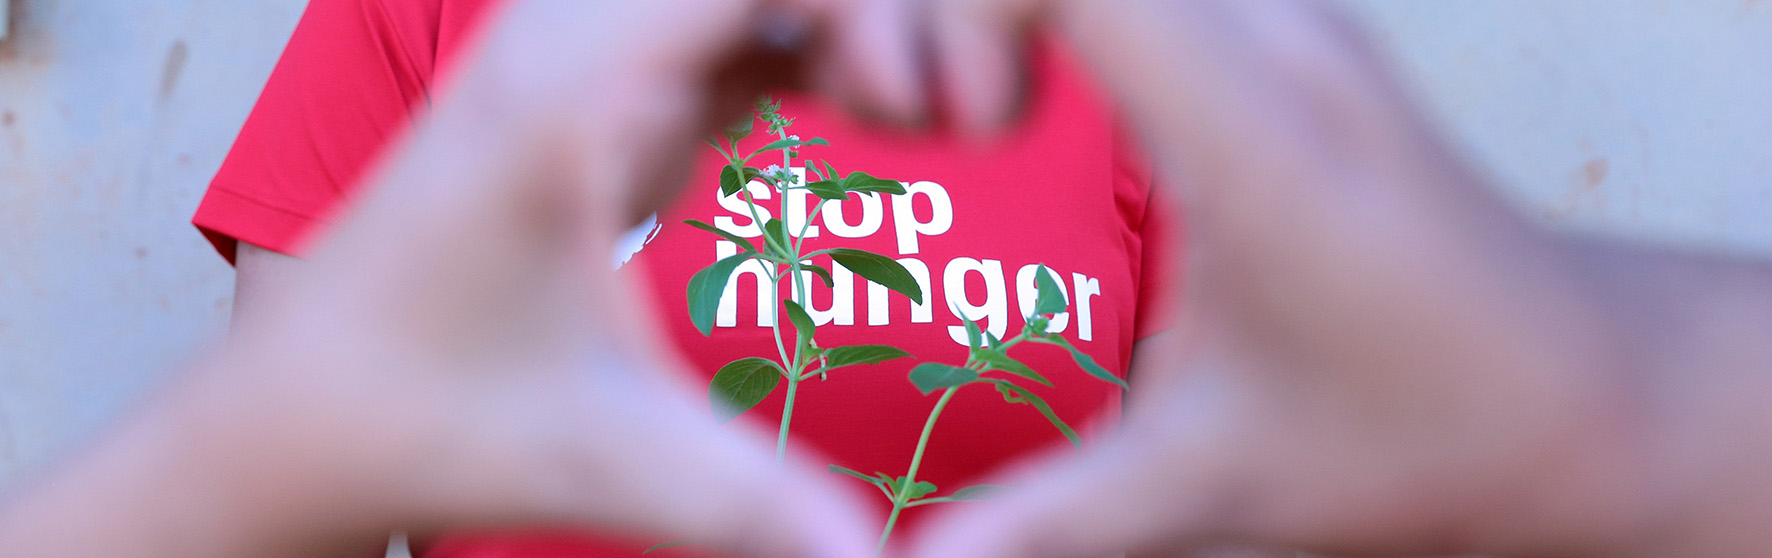 Act sustainably for a hunger-free world.